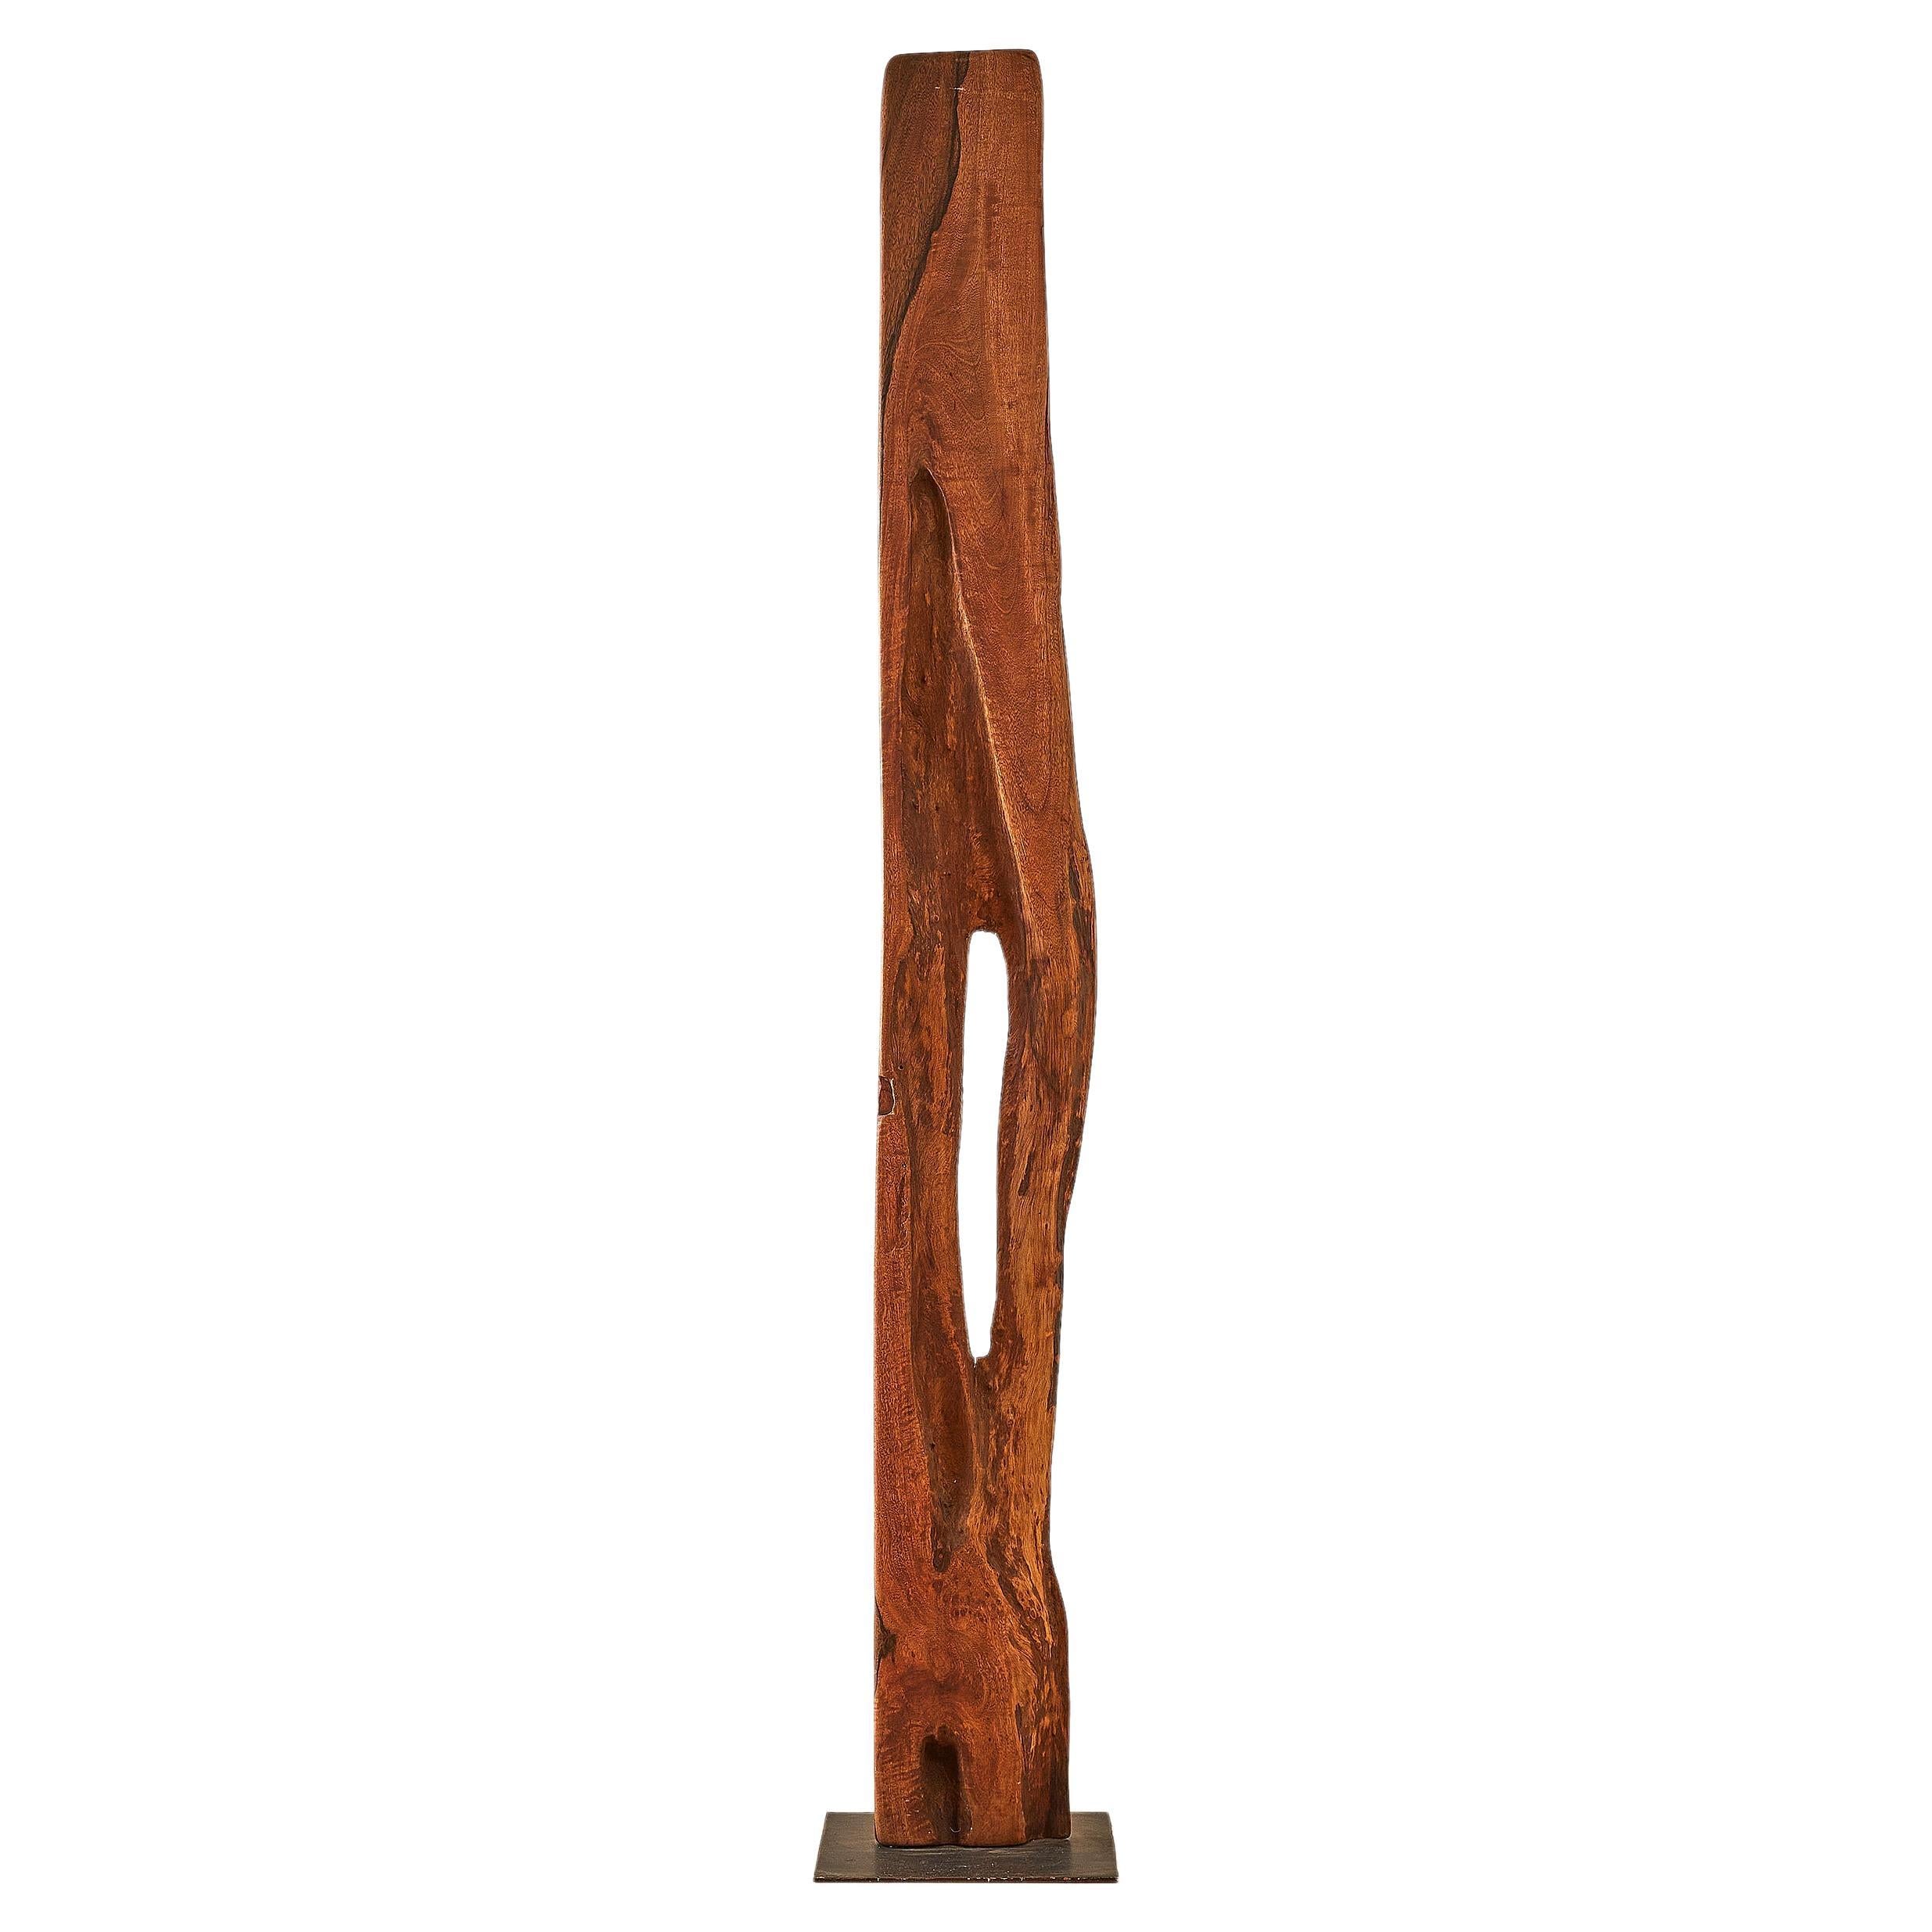 Kumbuk Wood Sculpture by the Somerset House For Sale